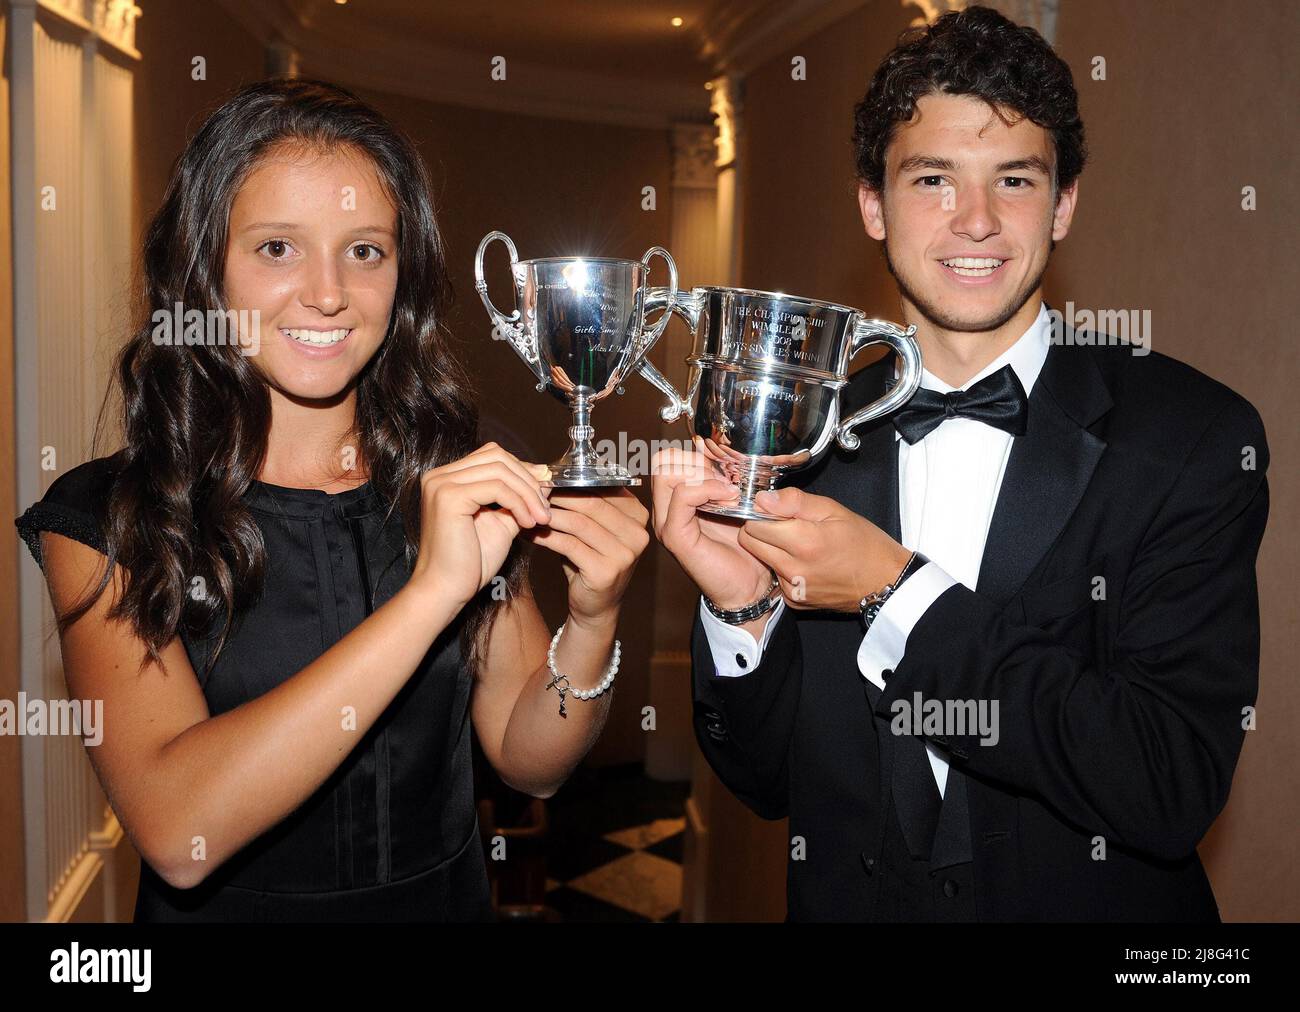 File photo dated 6-07-2008 of Laura Robson, 14, from Great Britain who won the Girl's Singles Championship title at Wimbledon on Saturday with the Boy's Single's winner Bulgarian Grigor Dimitrov. Former British number one Laura Robson announces retirement from tennis. Issue date: Monday May 16, 2022. Stock Photo